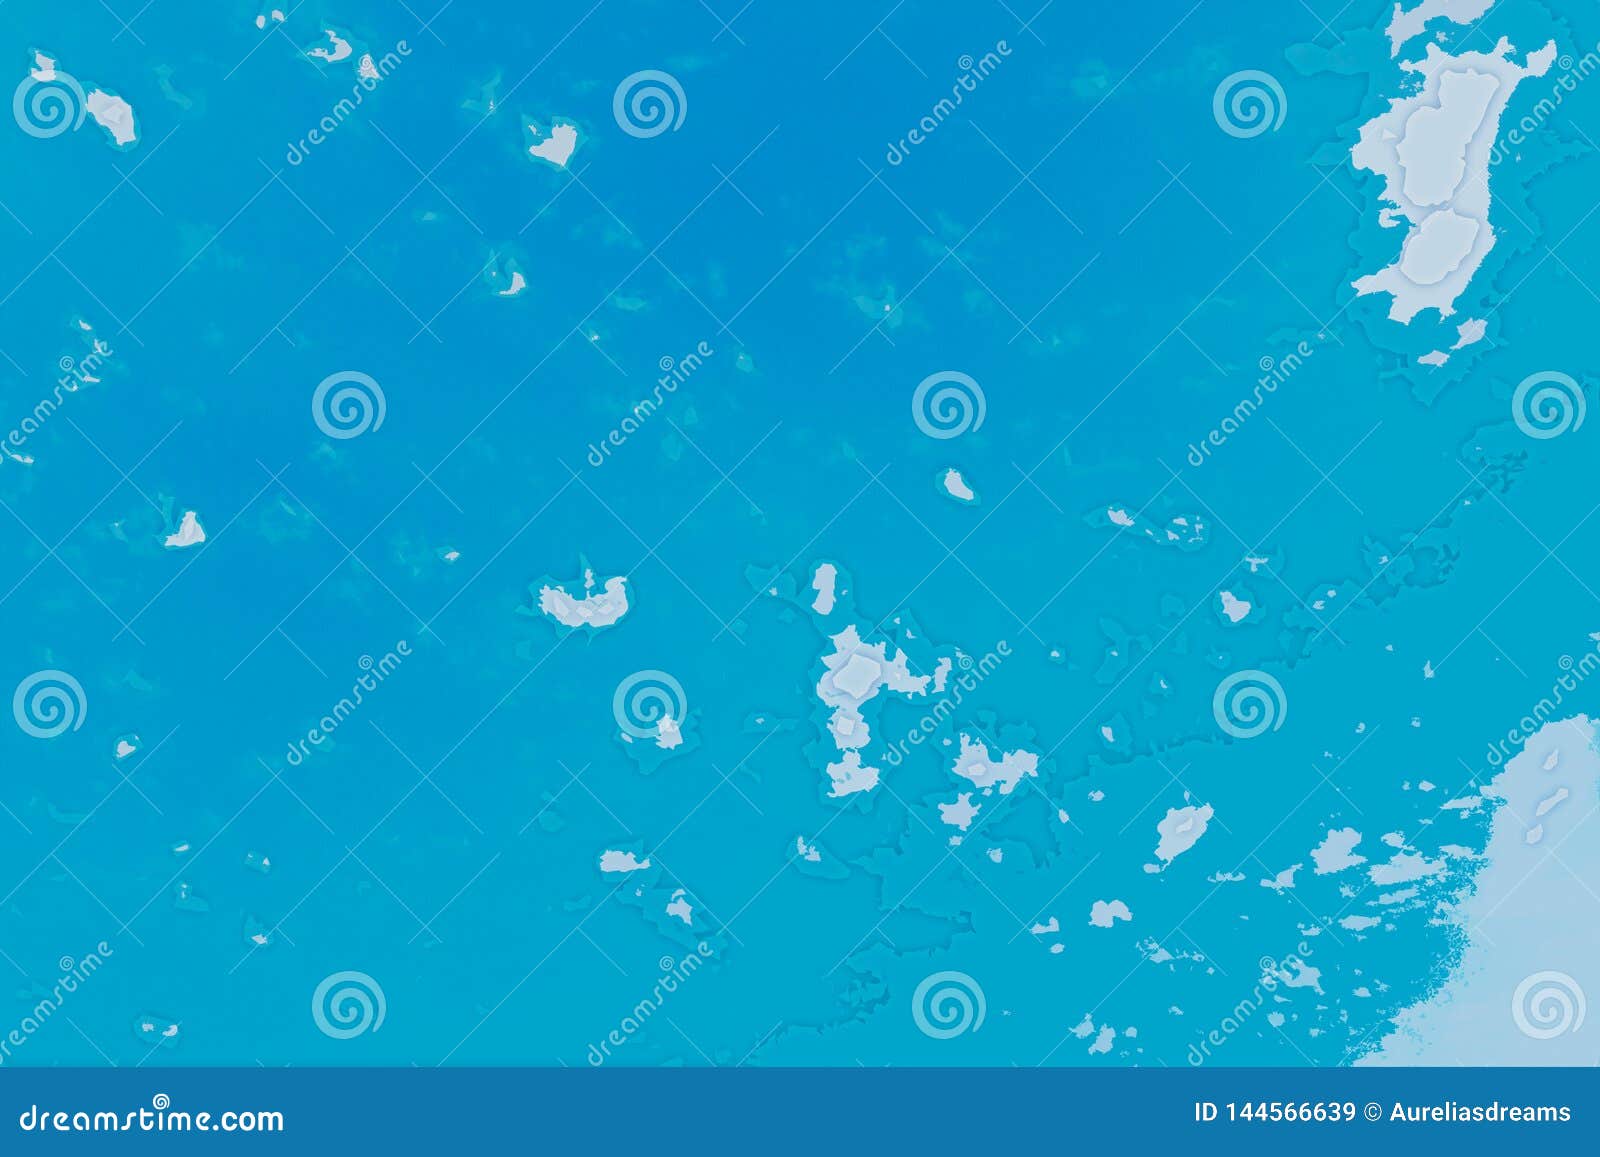 White, Blue and Cyan Background Texture. Abstract Map with North ...